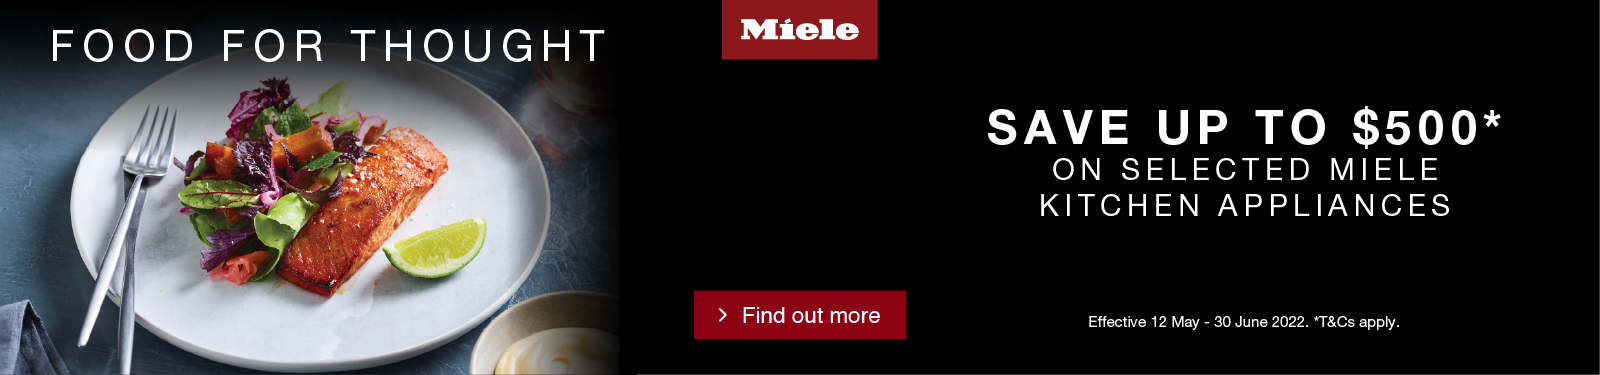 Save up to $500 on selected Miele Kitchen Appliances at Retravision